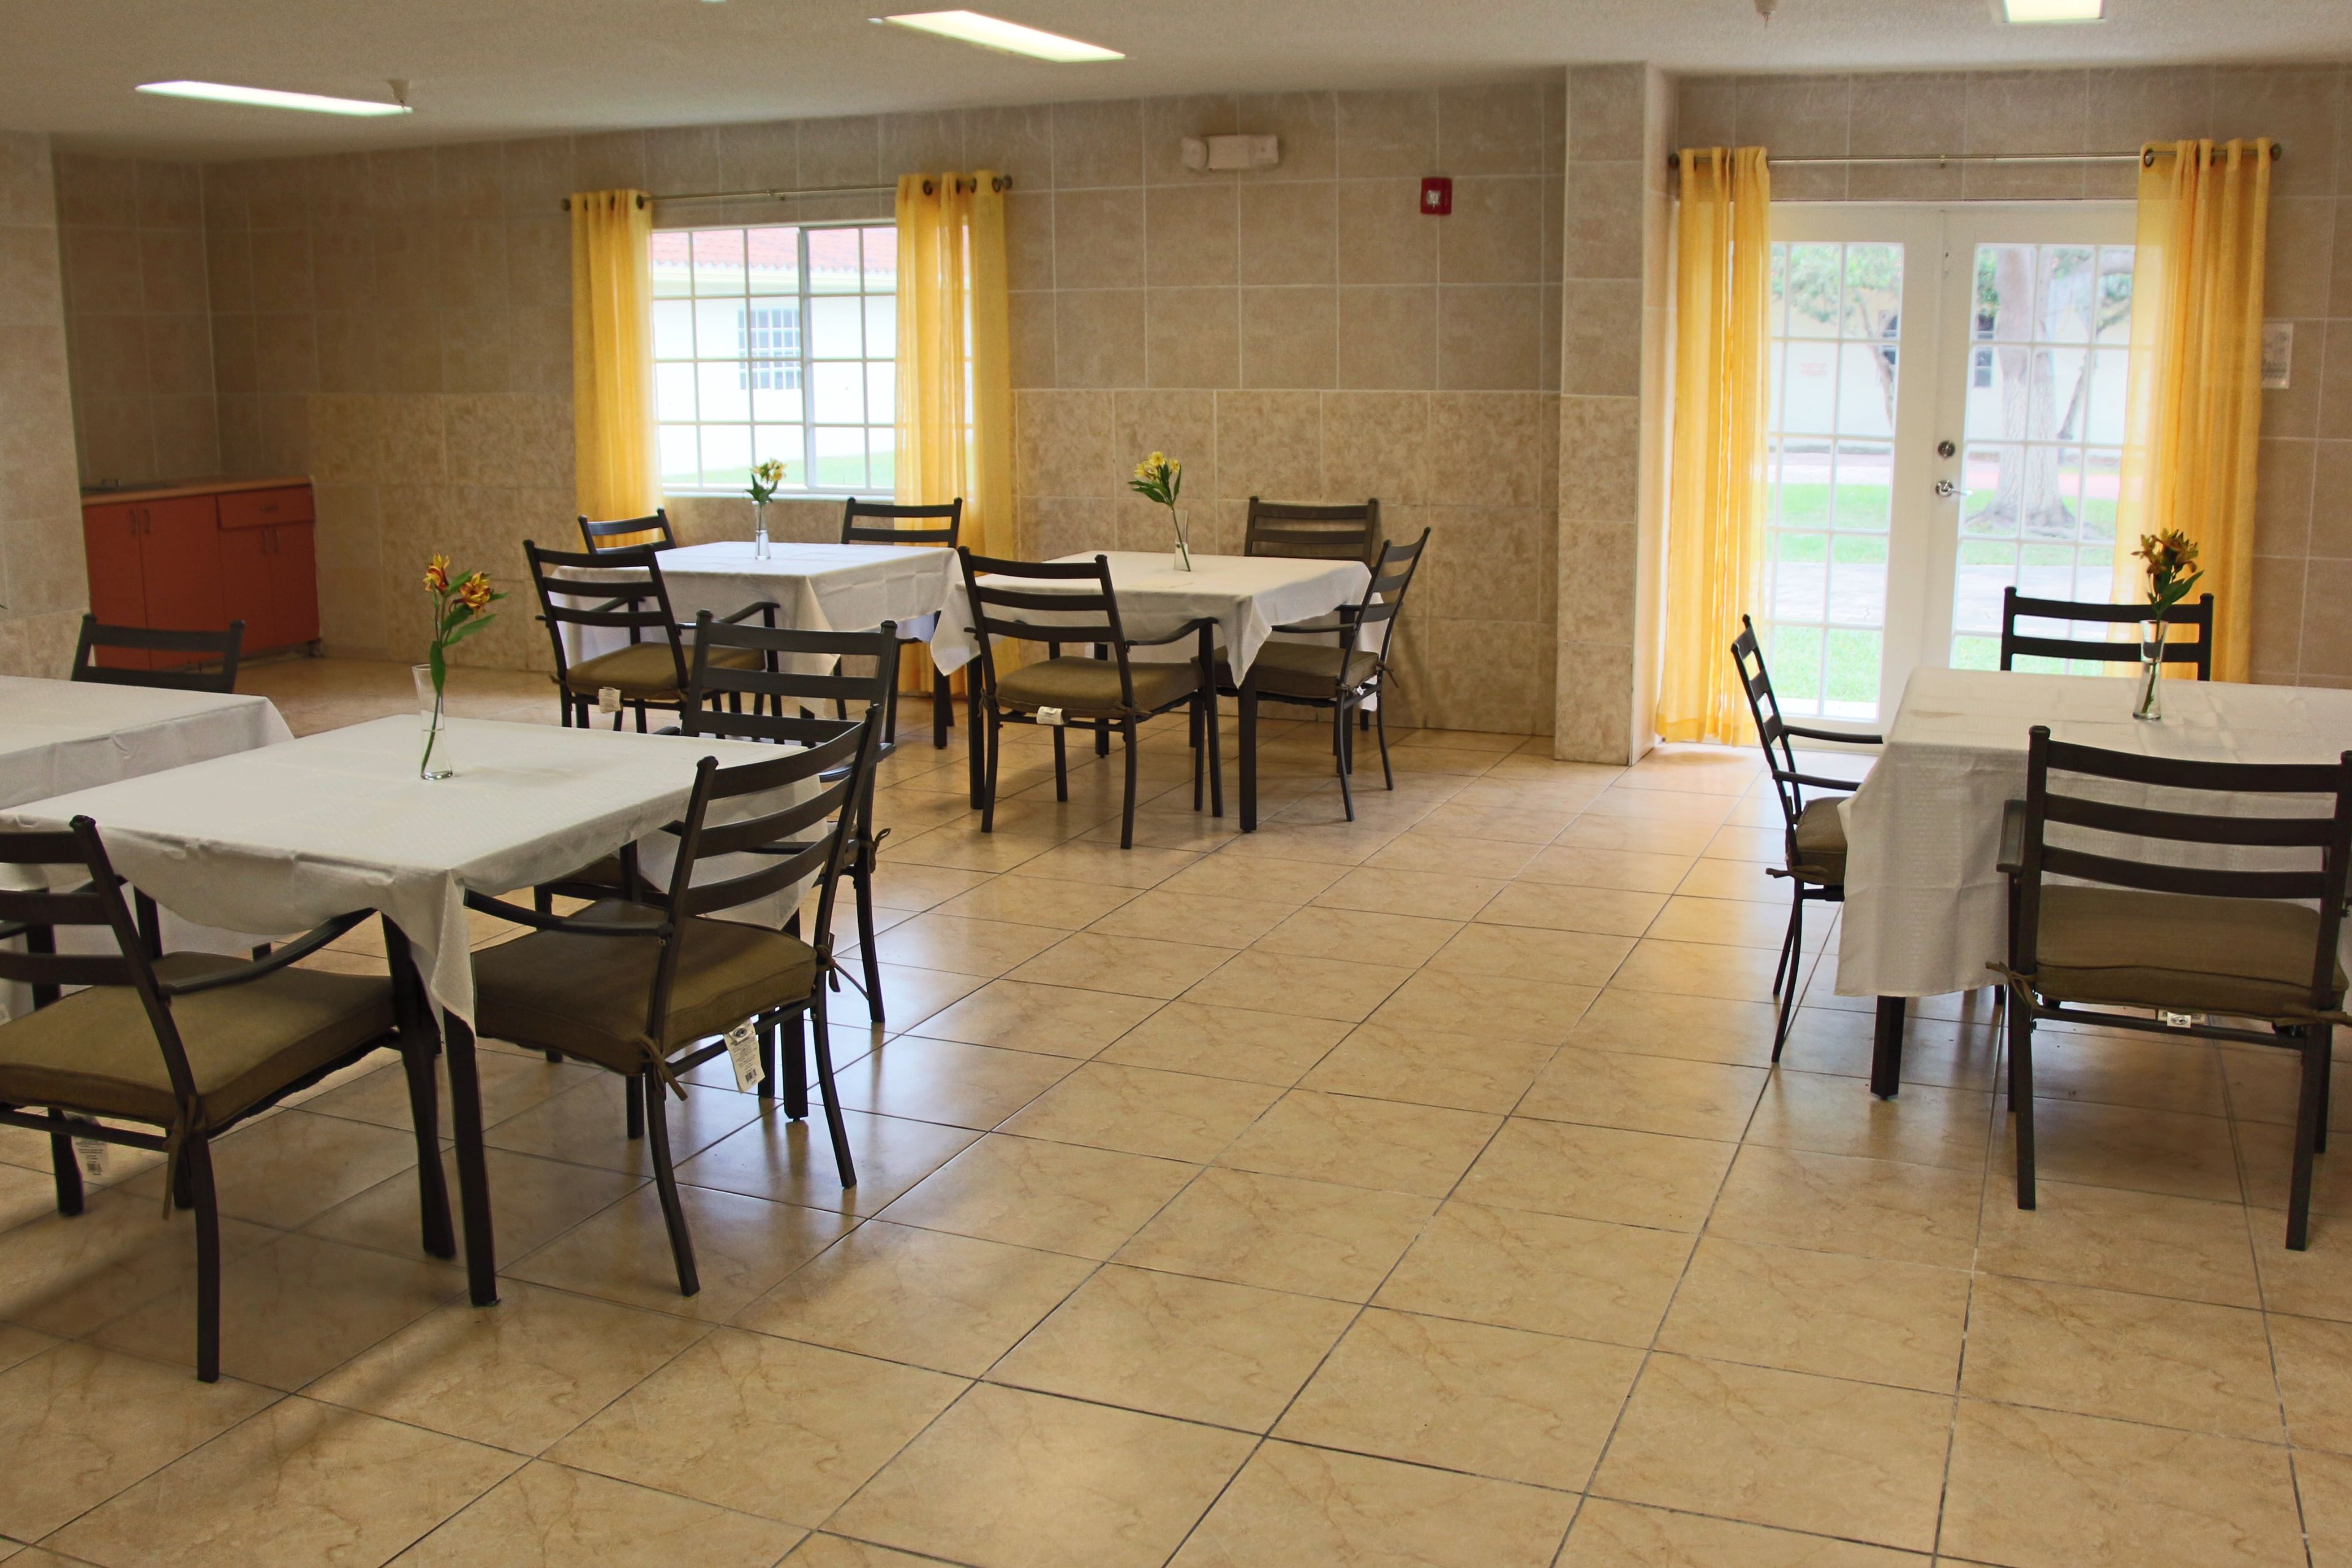 Floridian Gardens Assisted Living Facility, undefined, undefined 2